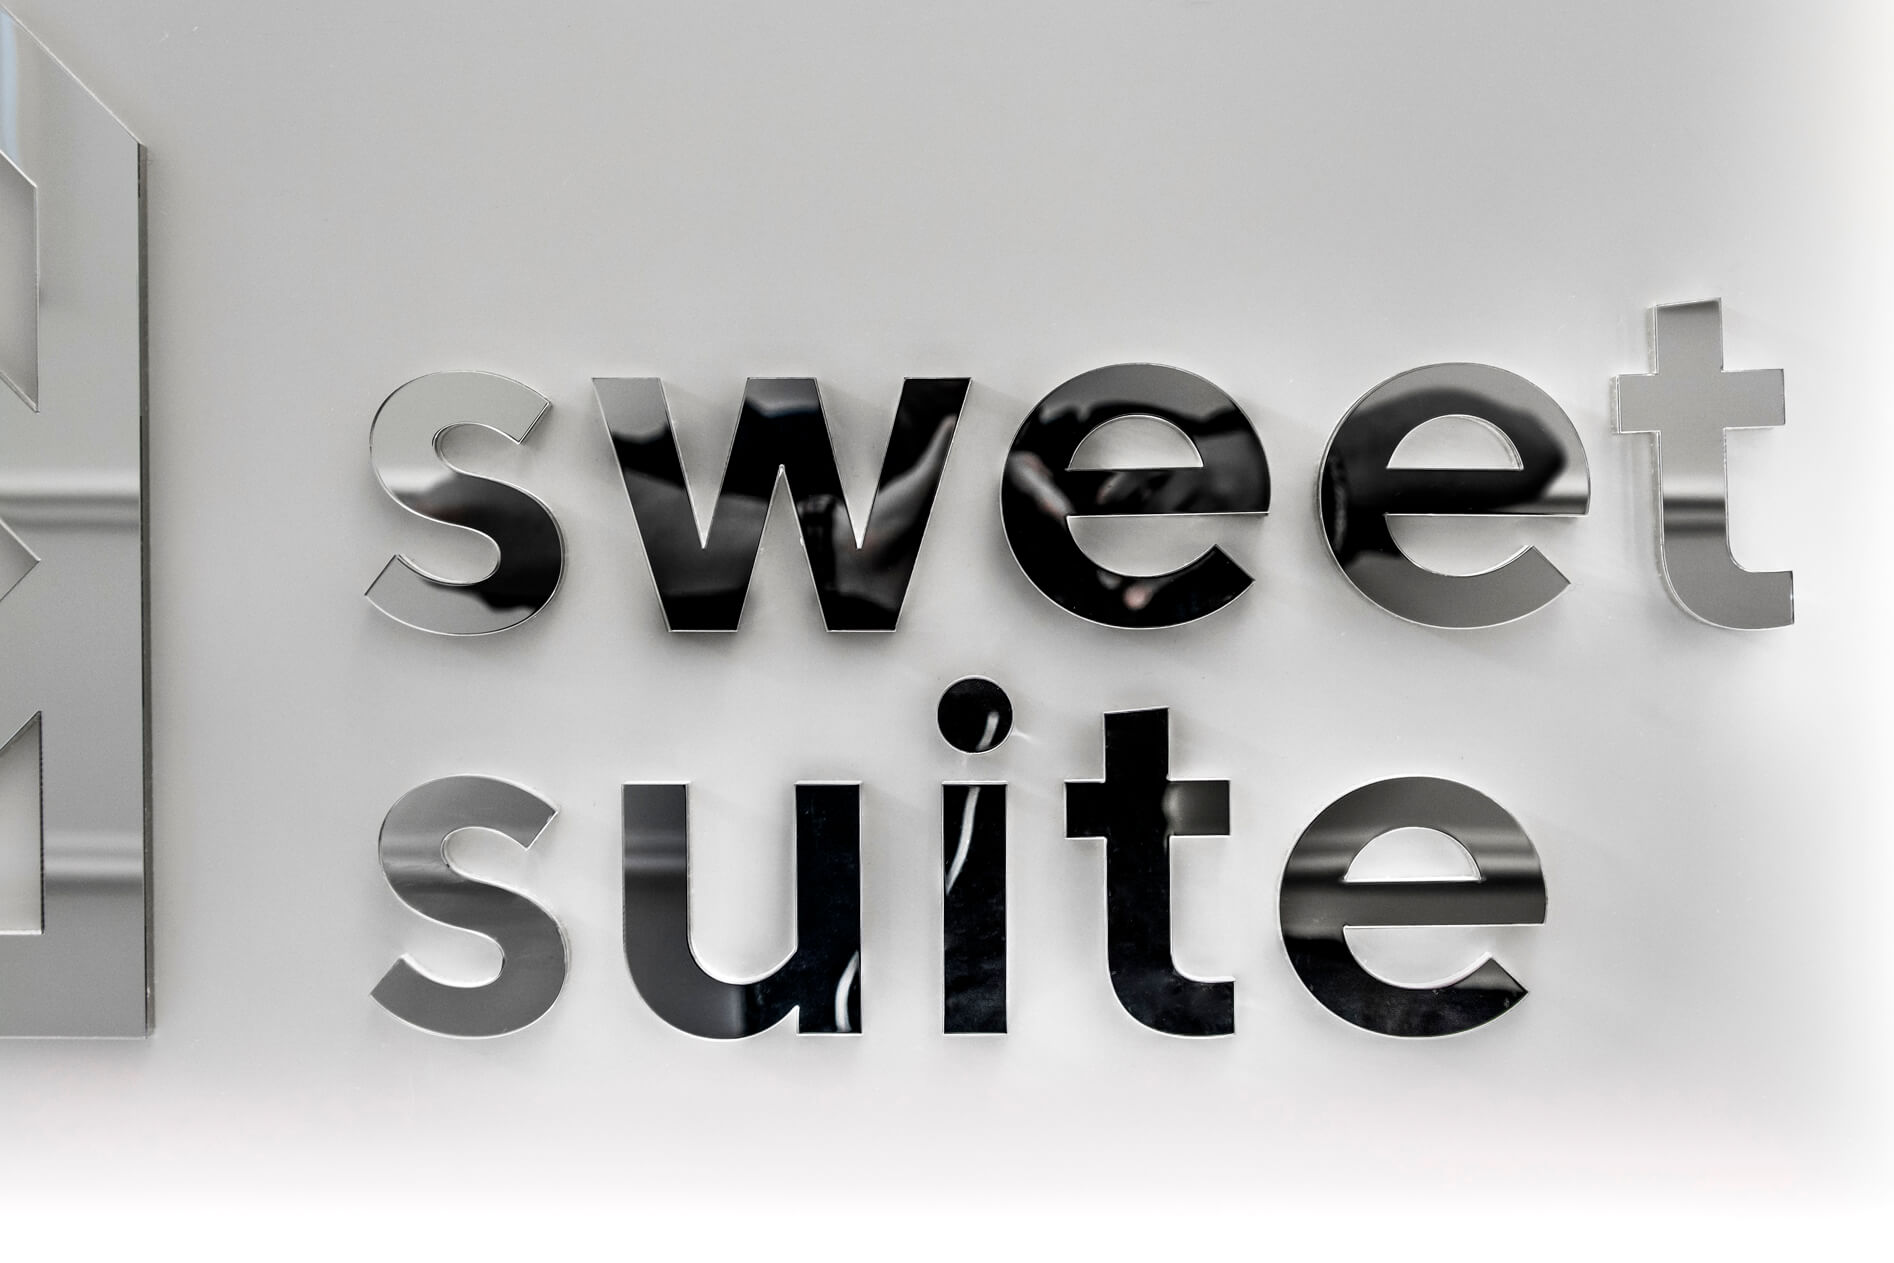 Sweet suit - Sweet suit - company logo and 3D letters made of Plexiglas with mirror effect